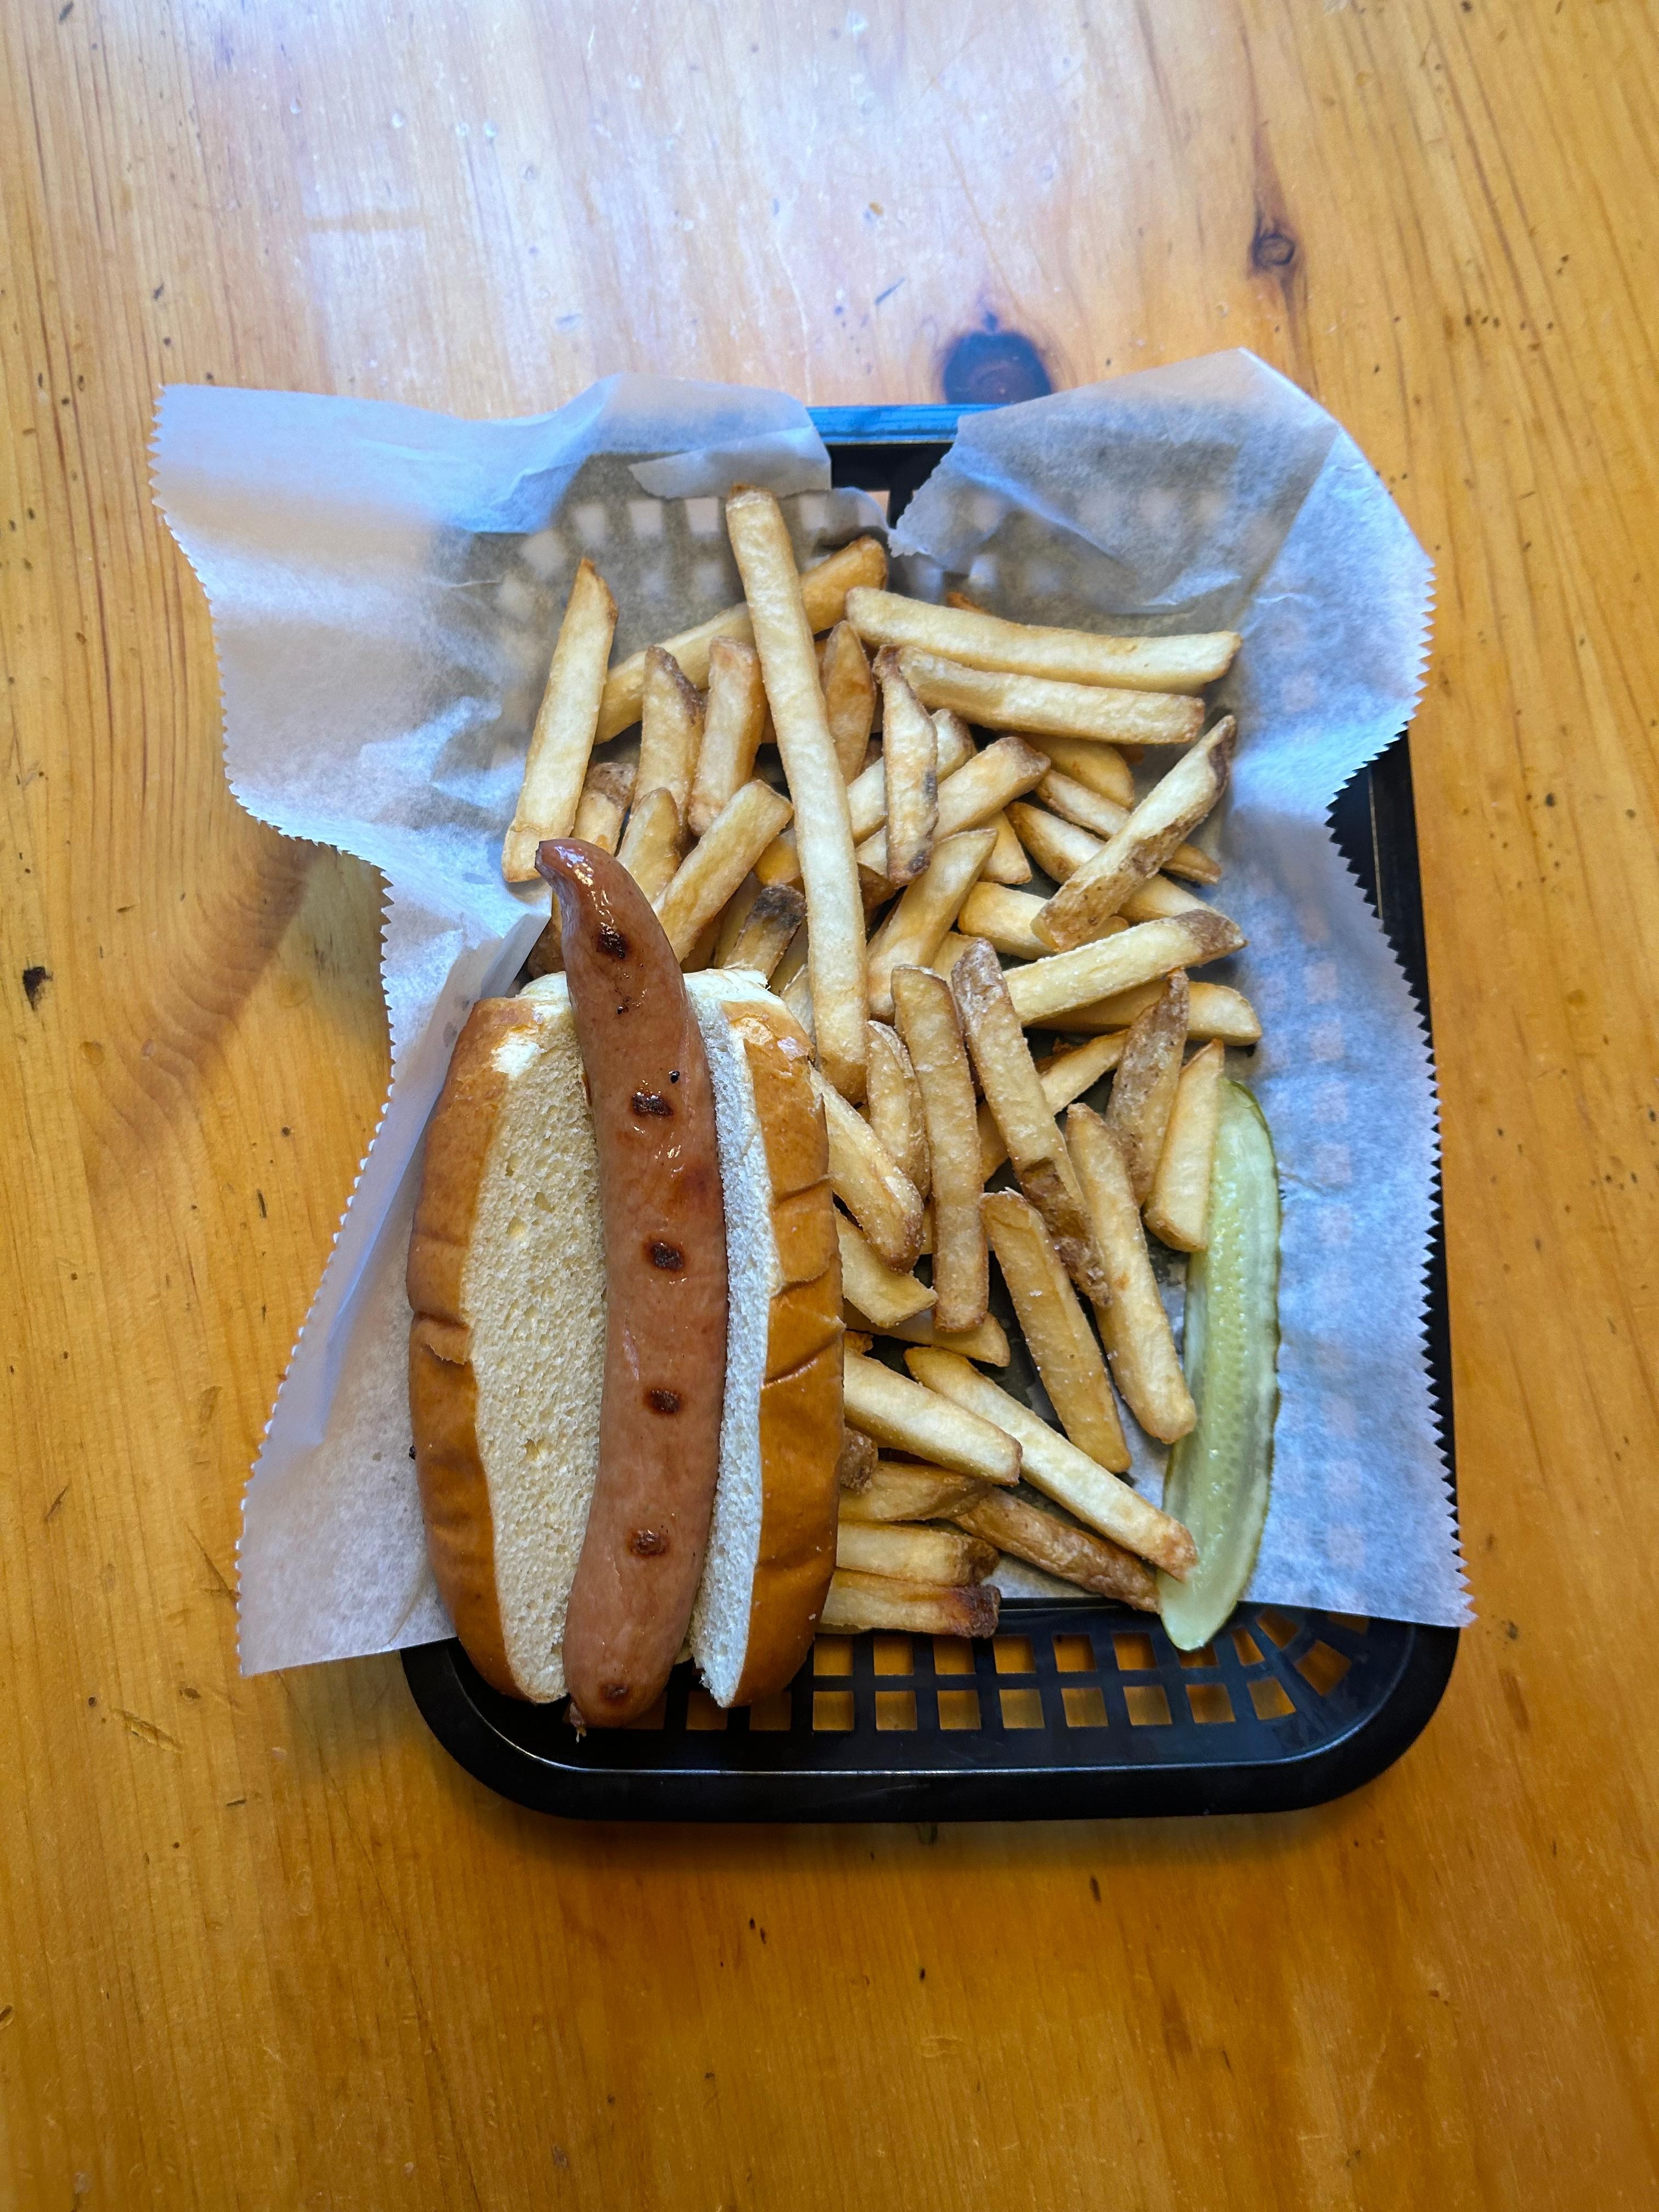 K- Hot Dog with Fries